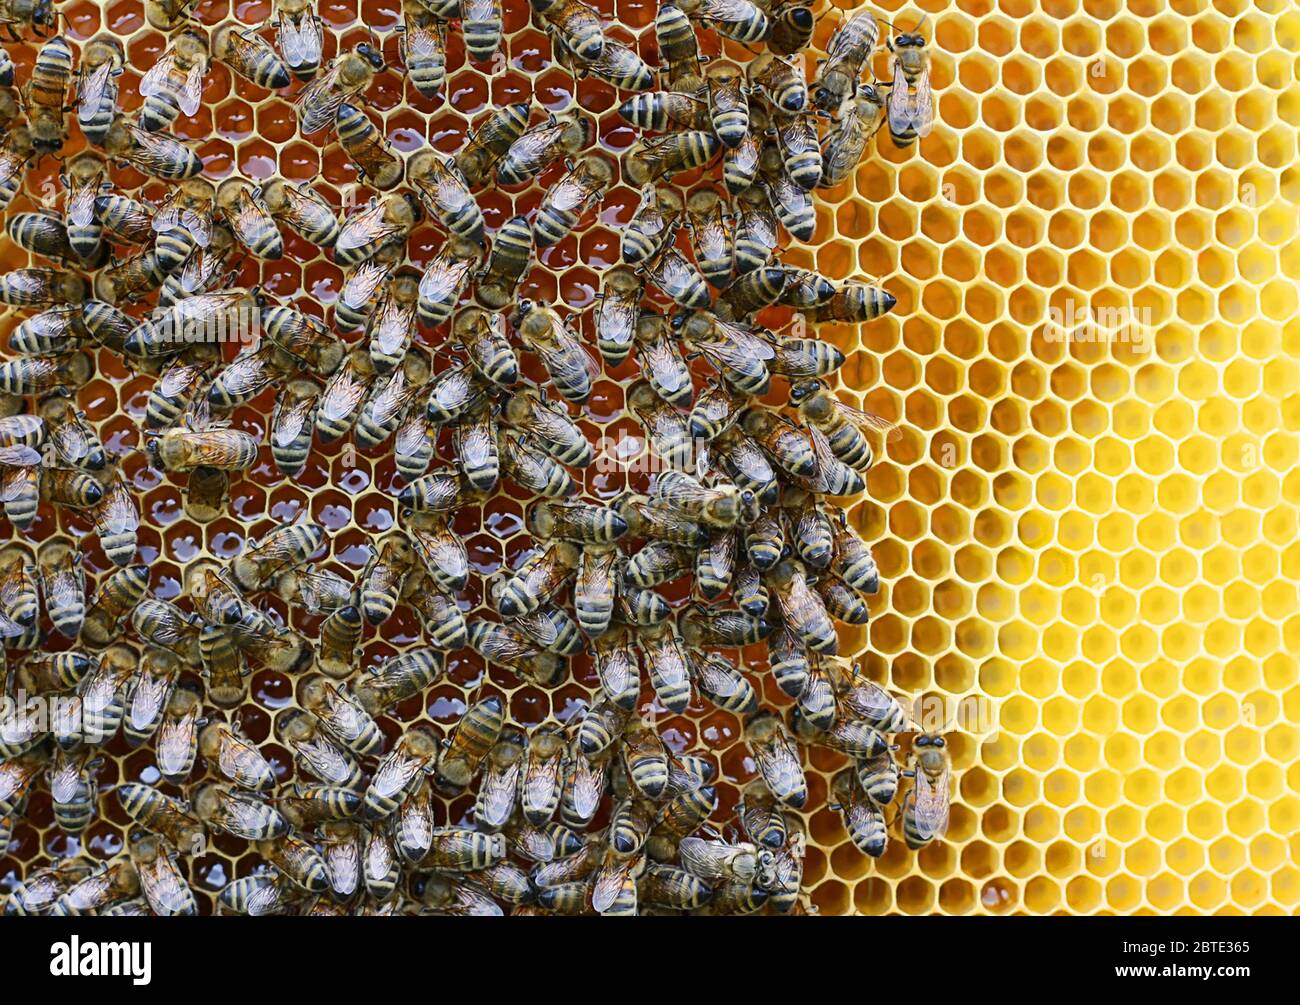 honey bee, hive bee (Apis mellifera mellifera), swarm of bees at a honeycomb, view from above, Germany Stock Photo